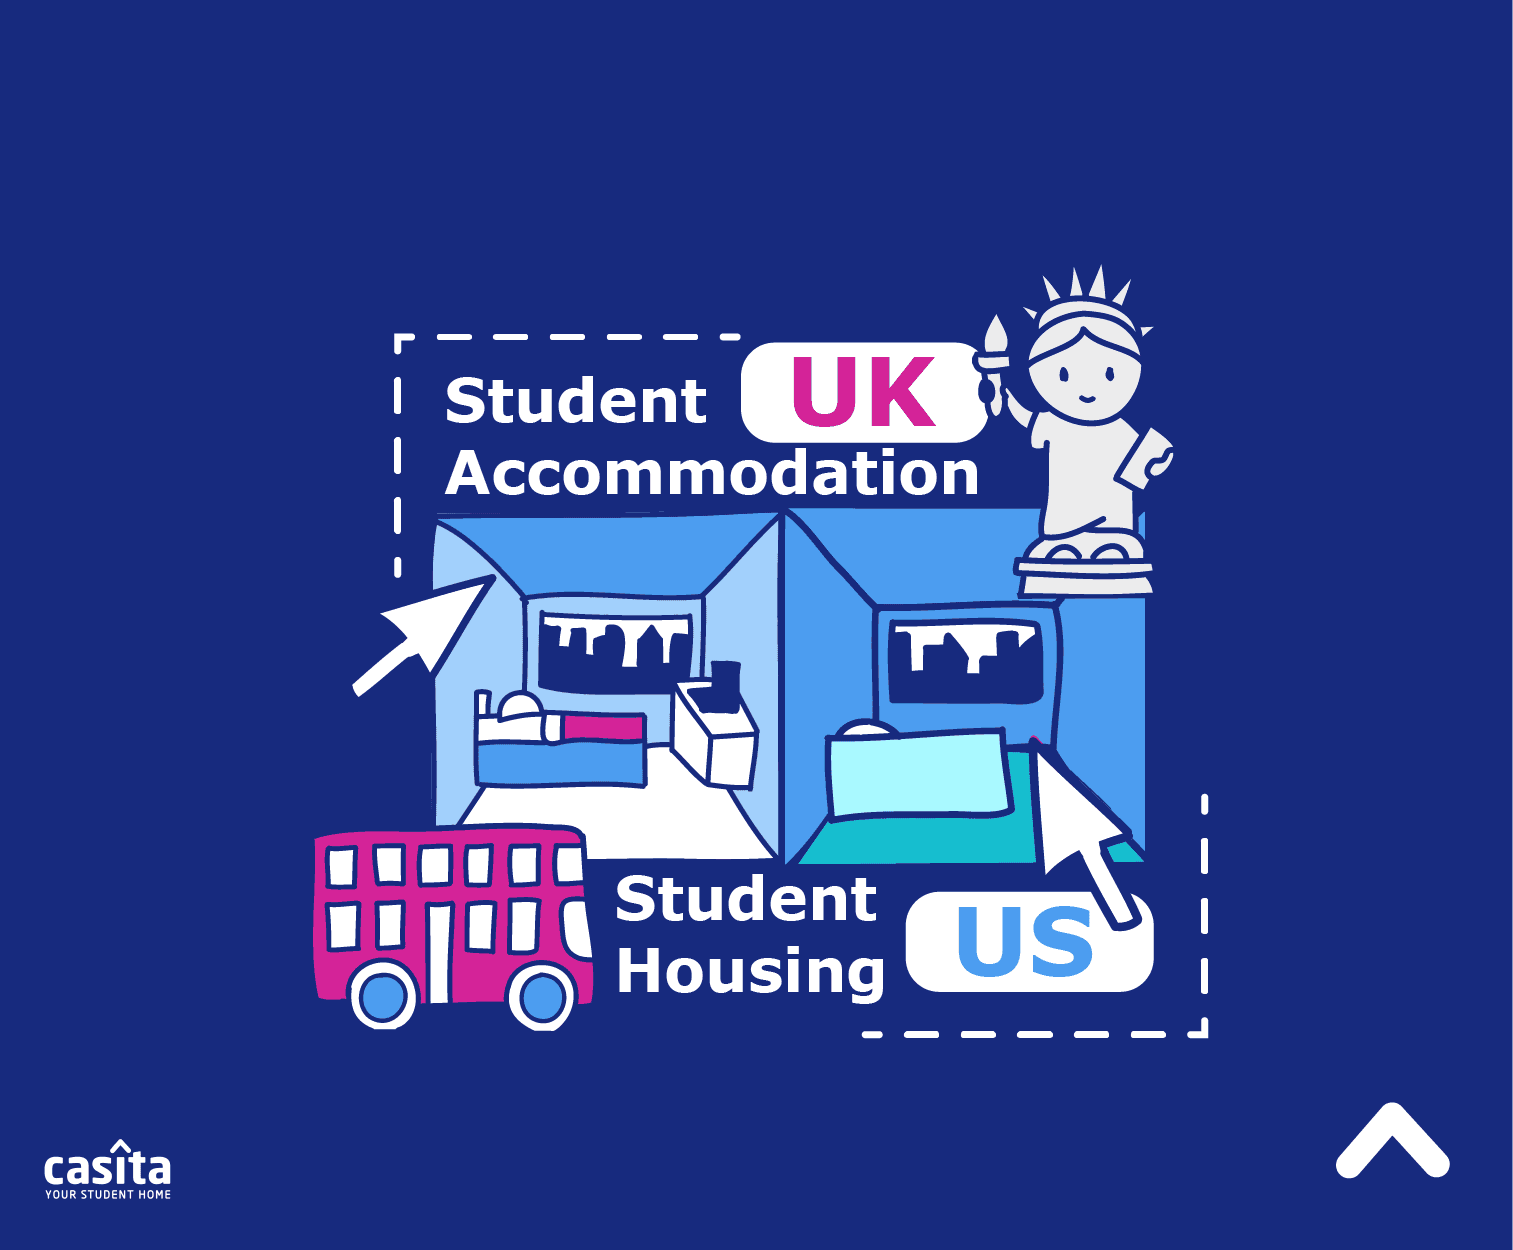 Student Accommodation in the UK vs Student Housing in the US